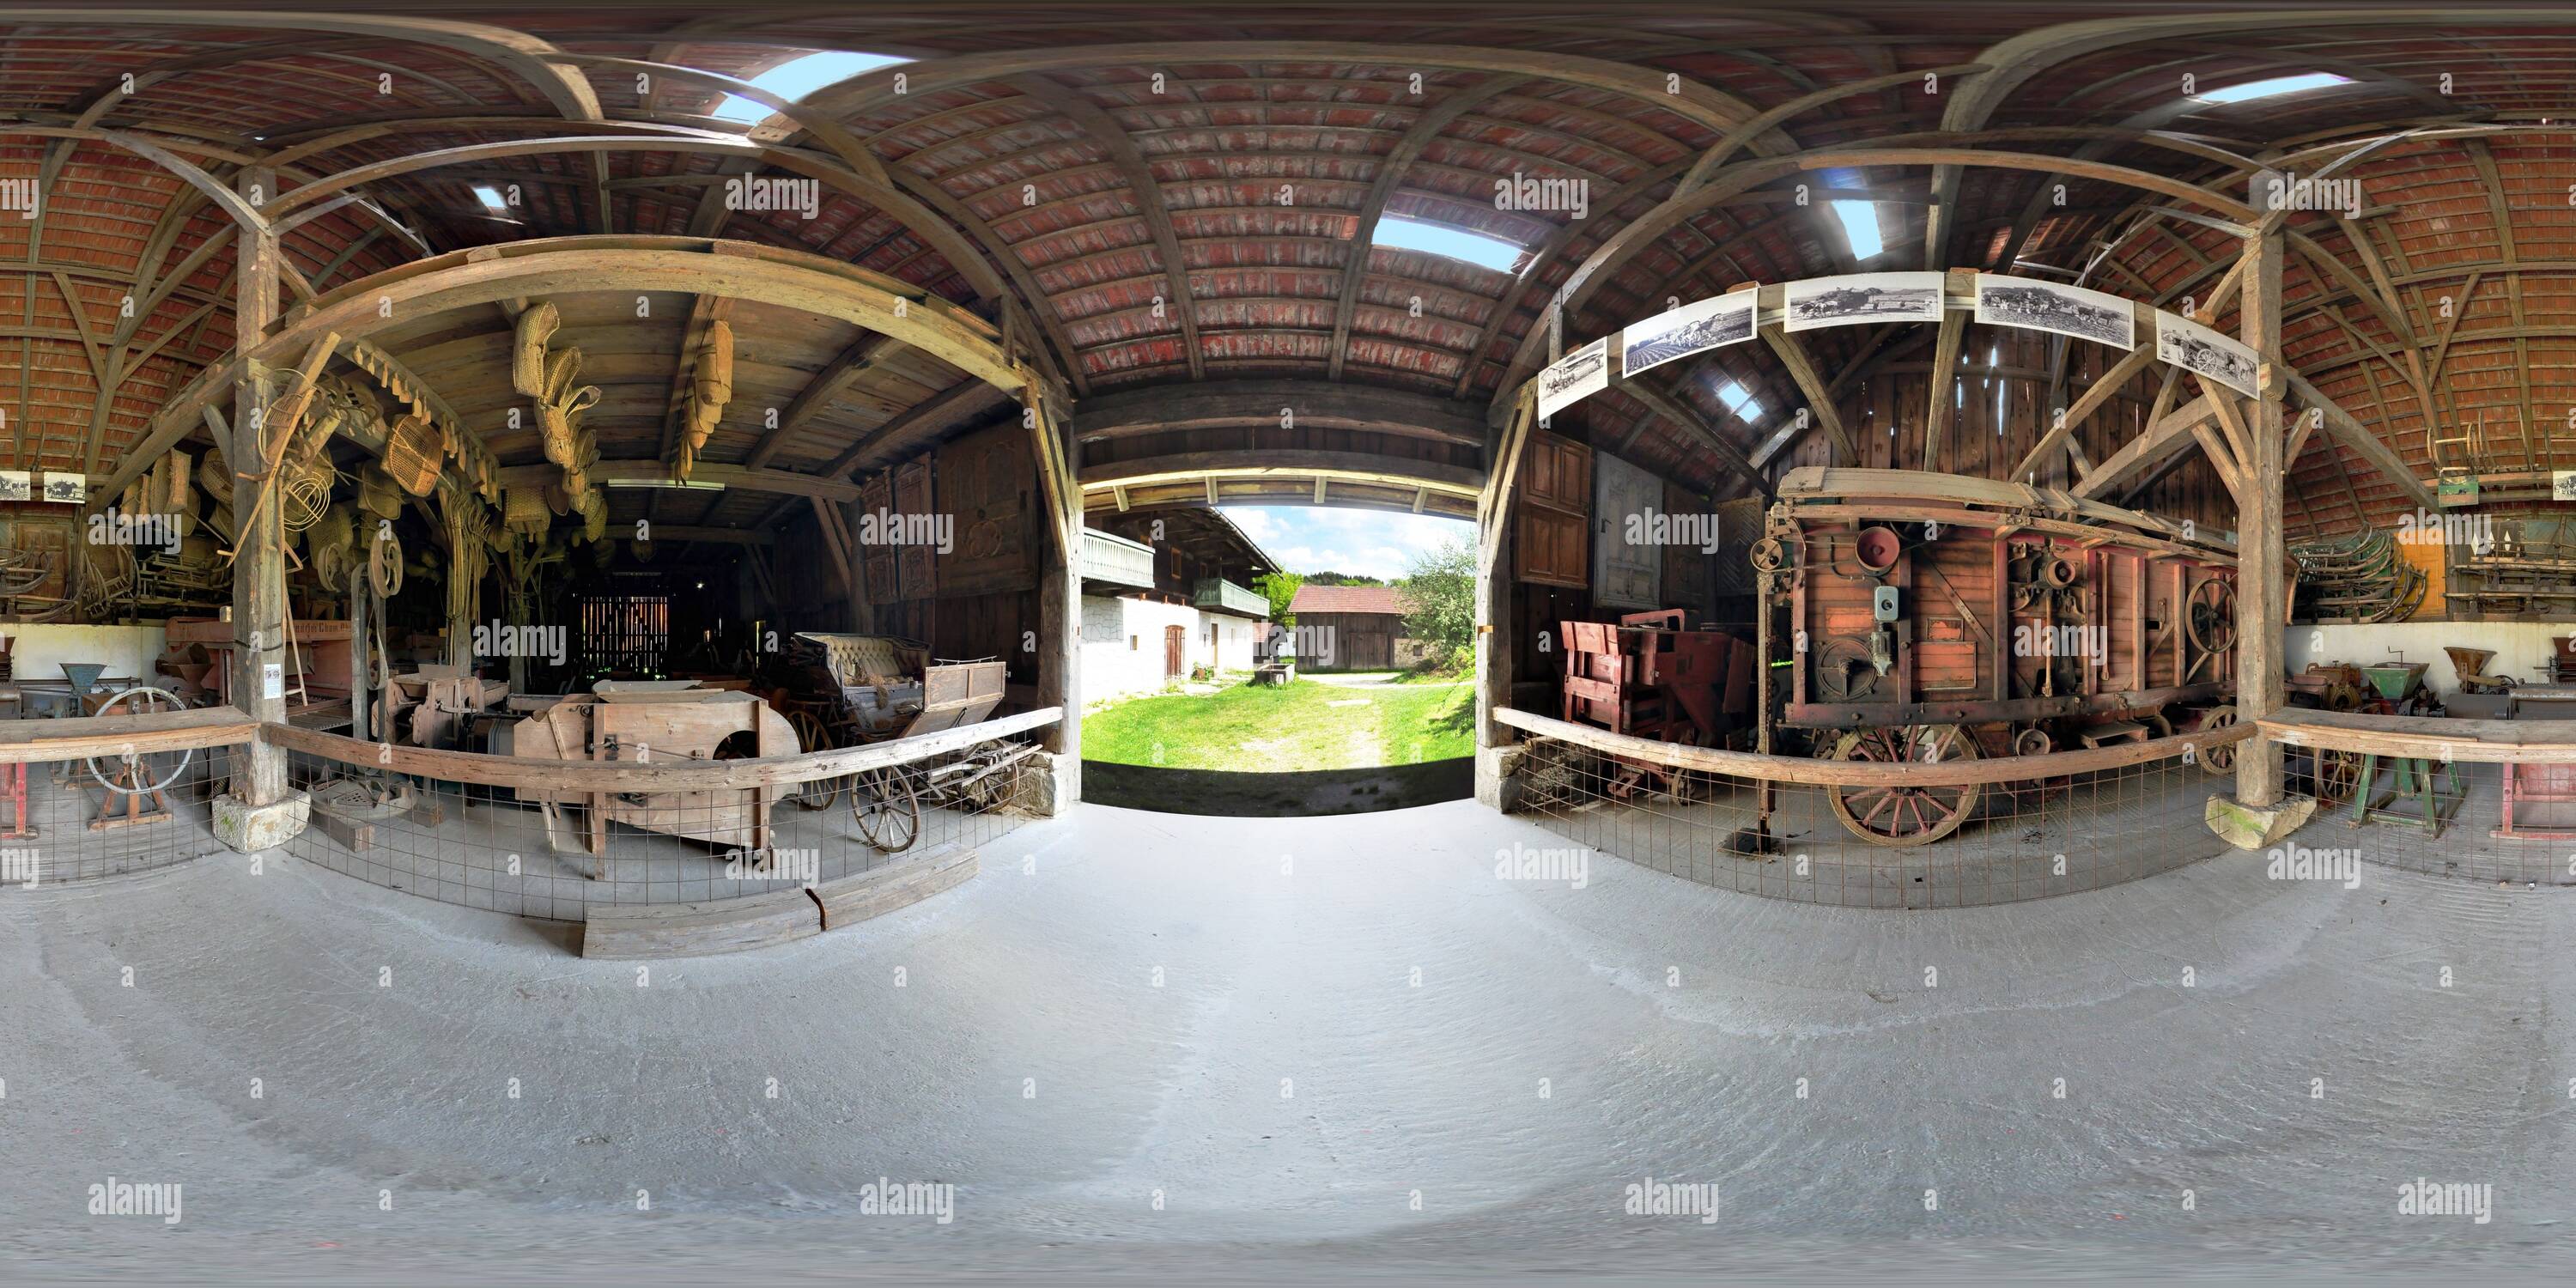 360 degree panoramic view of Museums Dorf Bayr. Wald - Groß Geräte Scheune